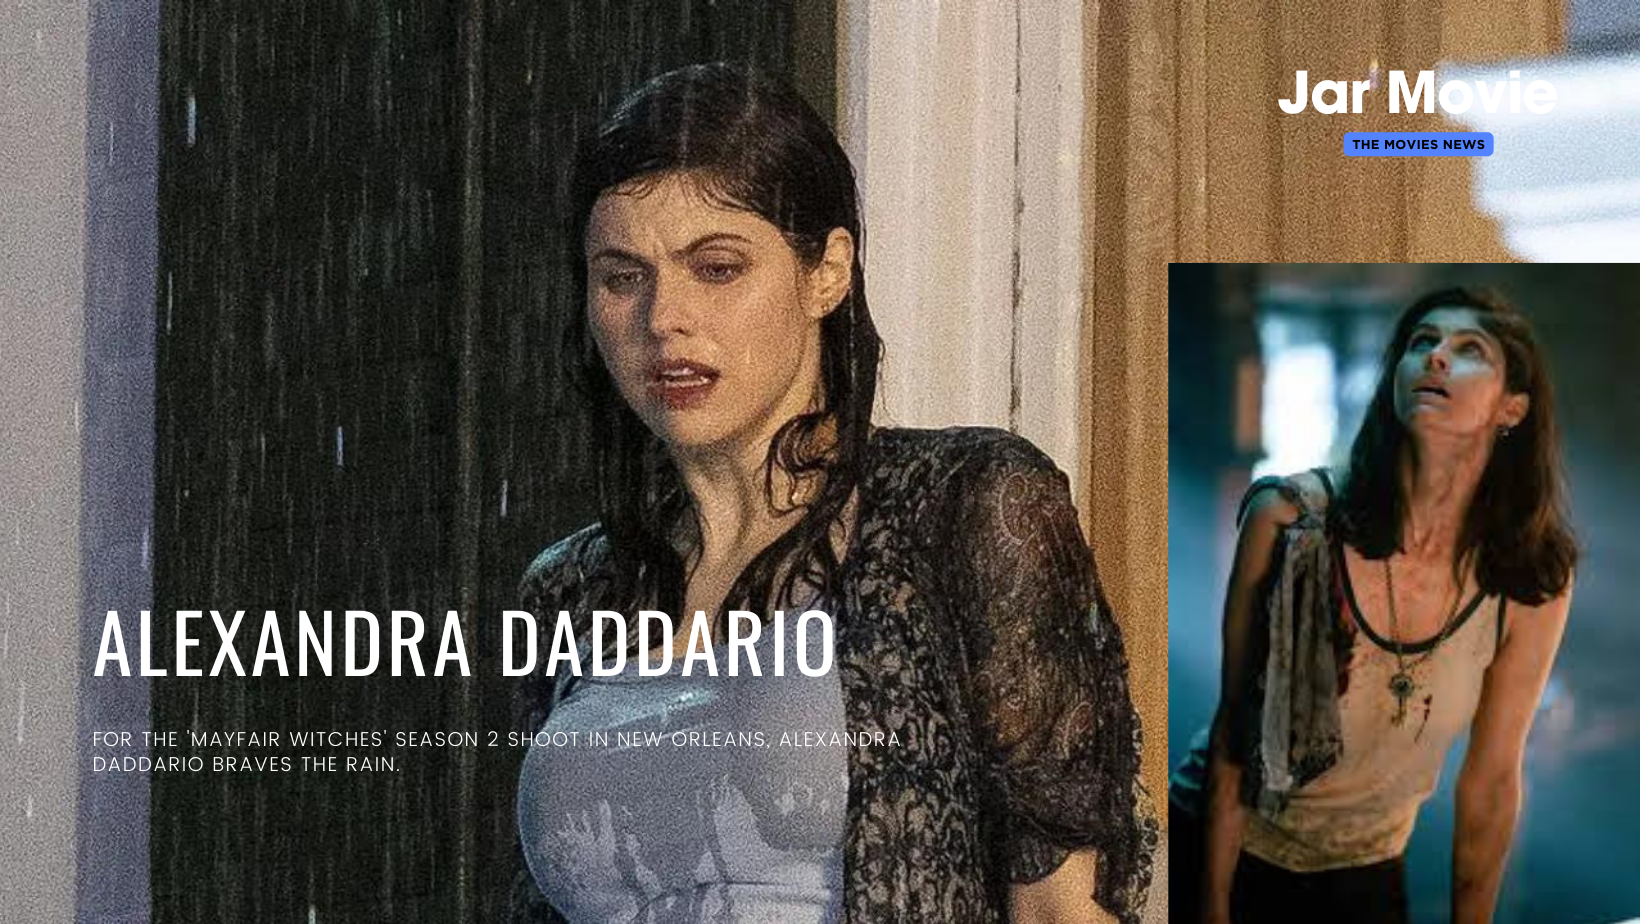 For the 'Mayfair Witches' Season 2 shoot in New Orleans, Alexandra Daddario braves the rain.